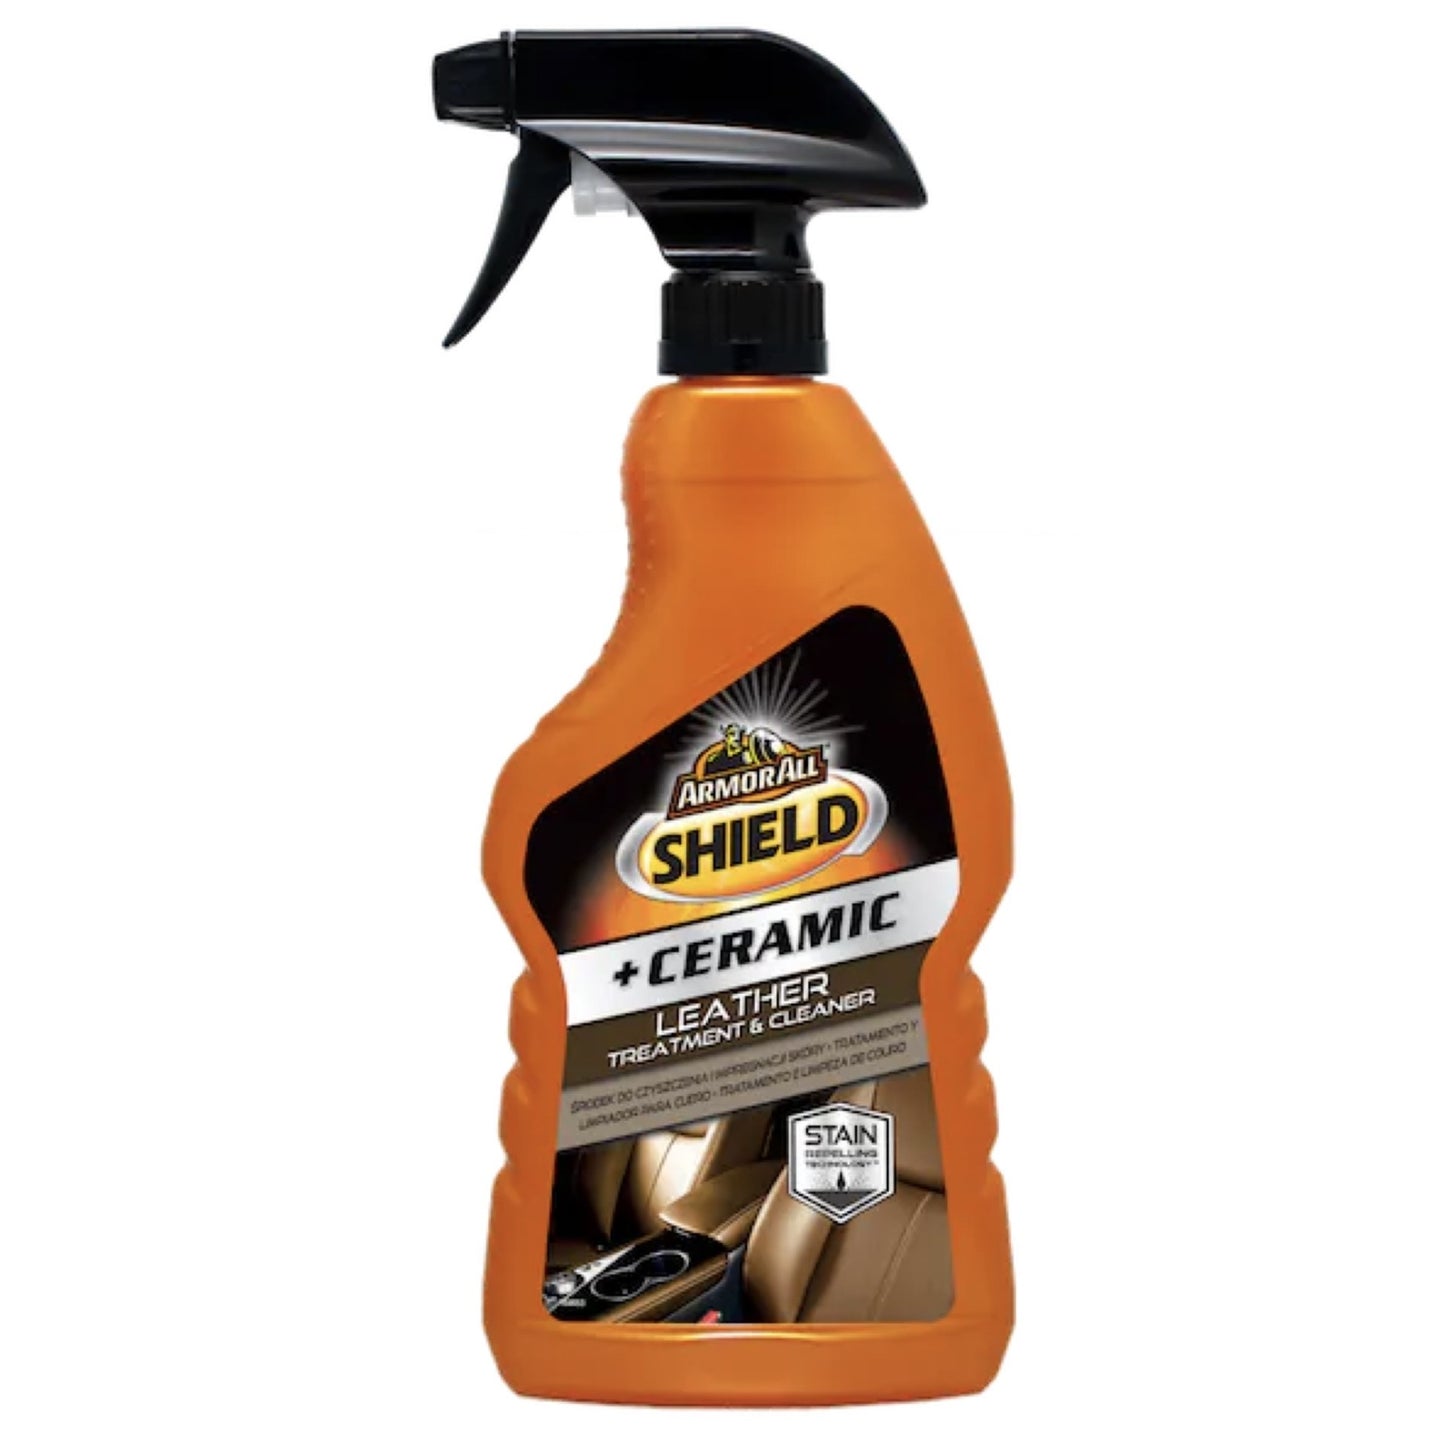 Armor All® Shield + Ceramic Leather Treatment & Cleaner